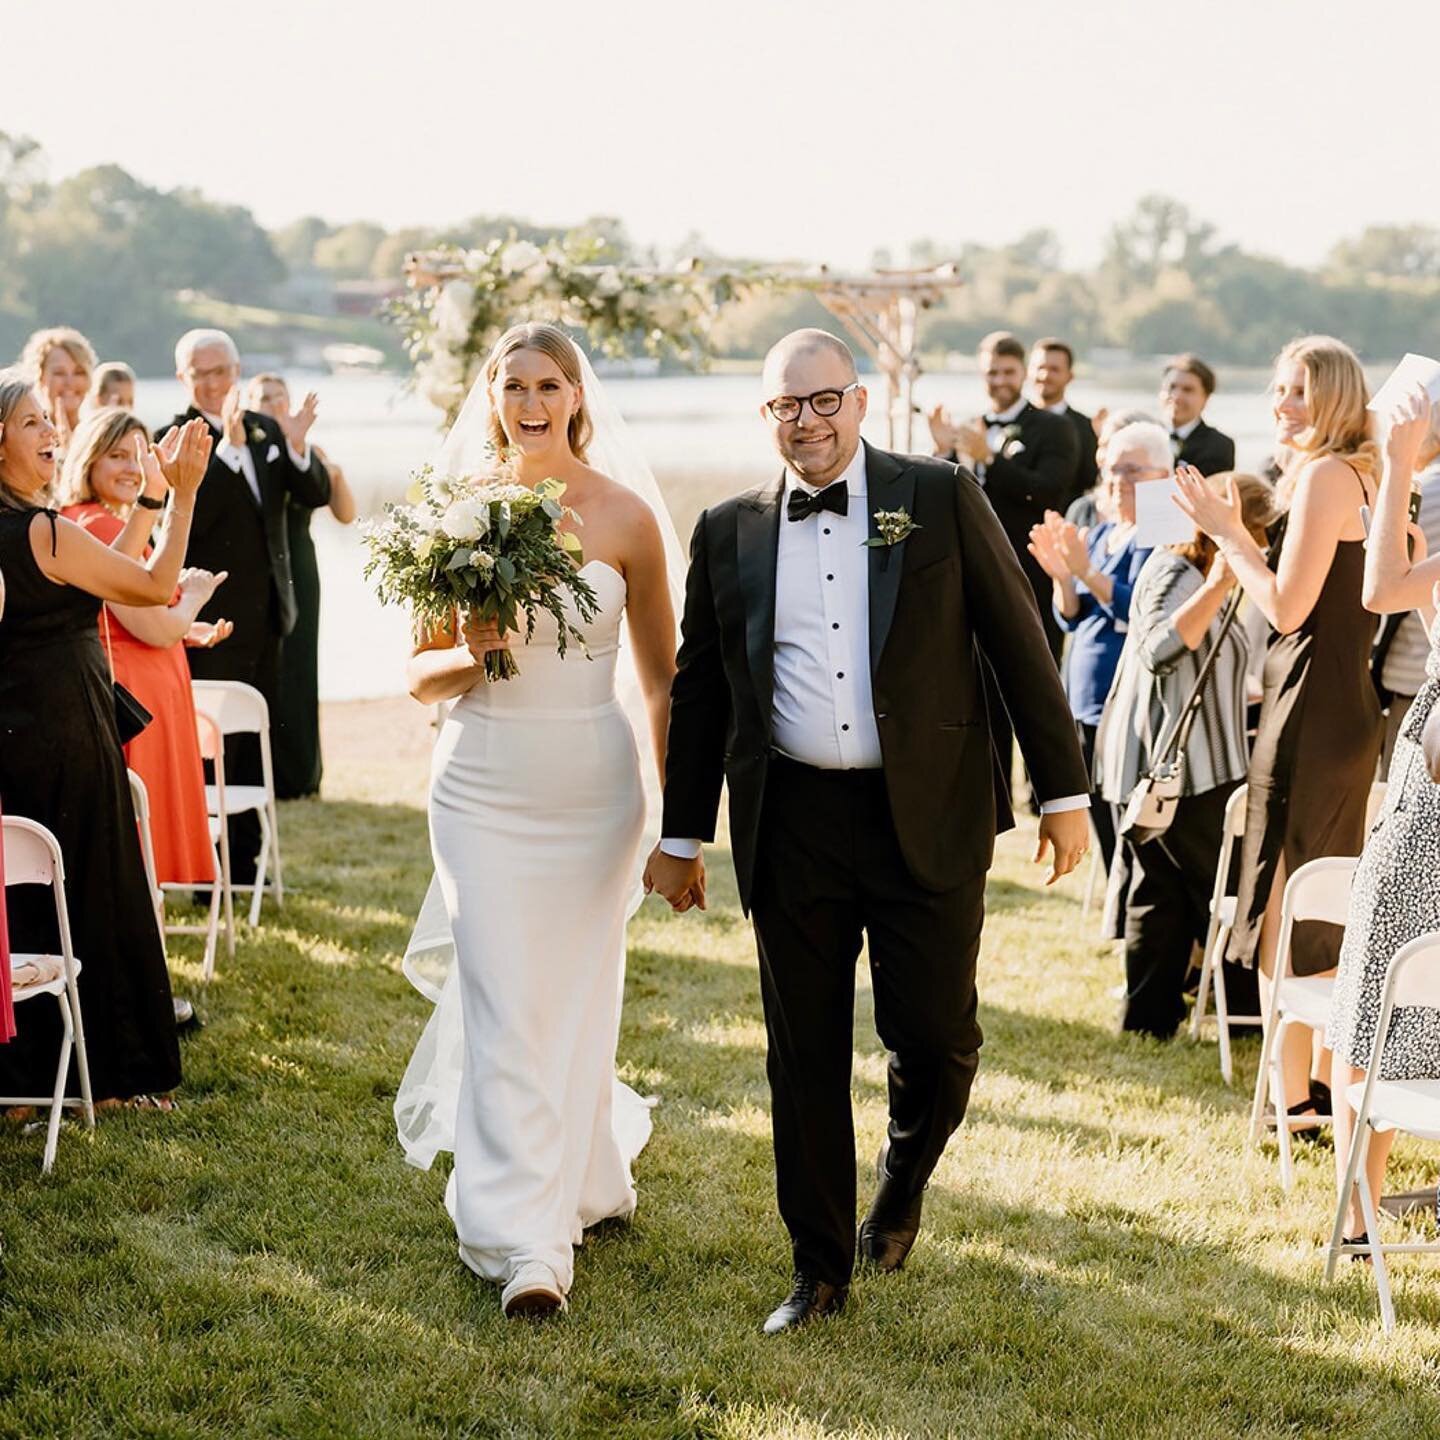 Some of my favorite moments from this gorgeous backyard wedding with Molly &amp; Aaron 😍 everything from walking back down the aisle after being announced as husband and wife, Aaron getting ready with his dad, grand entrance into the reception, mome